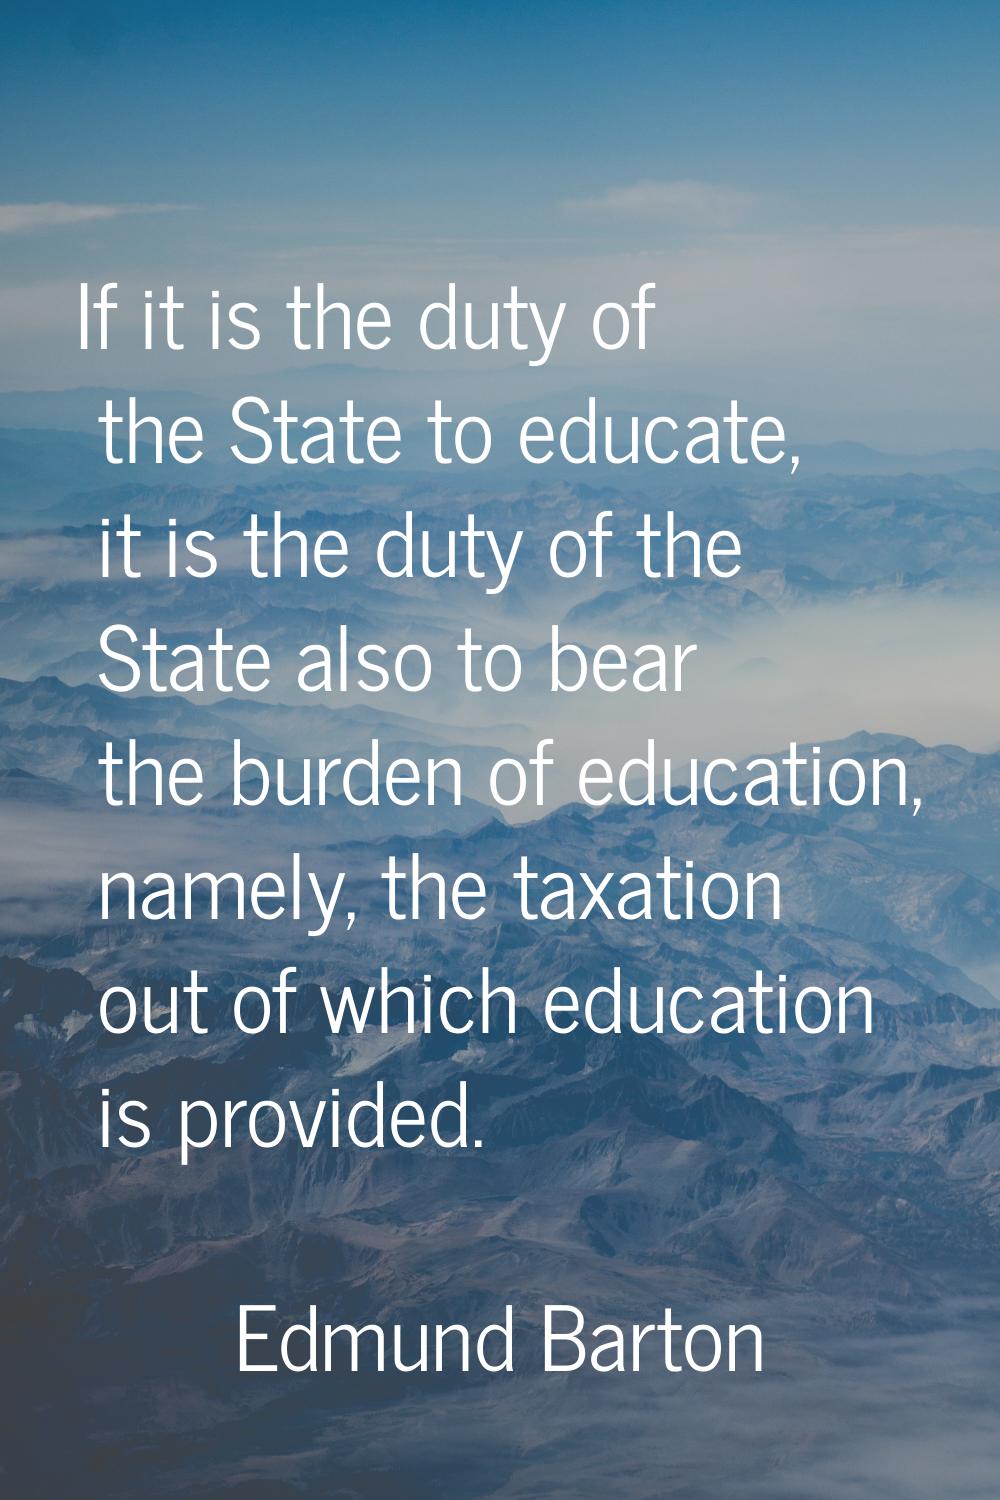 If it is the duty of the State to educate, it is the duty of the State also to bear the burden of e